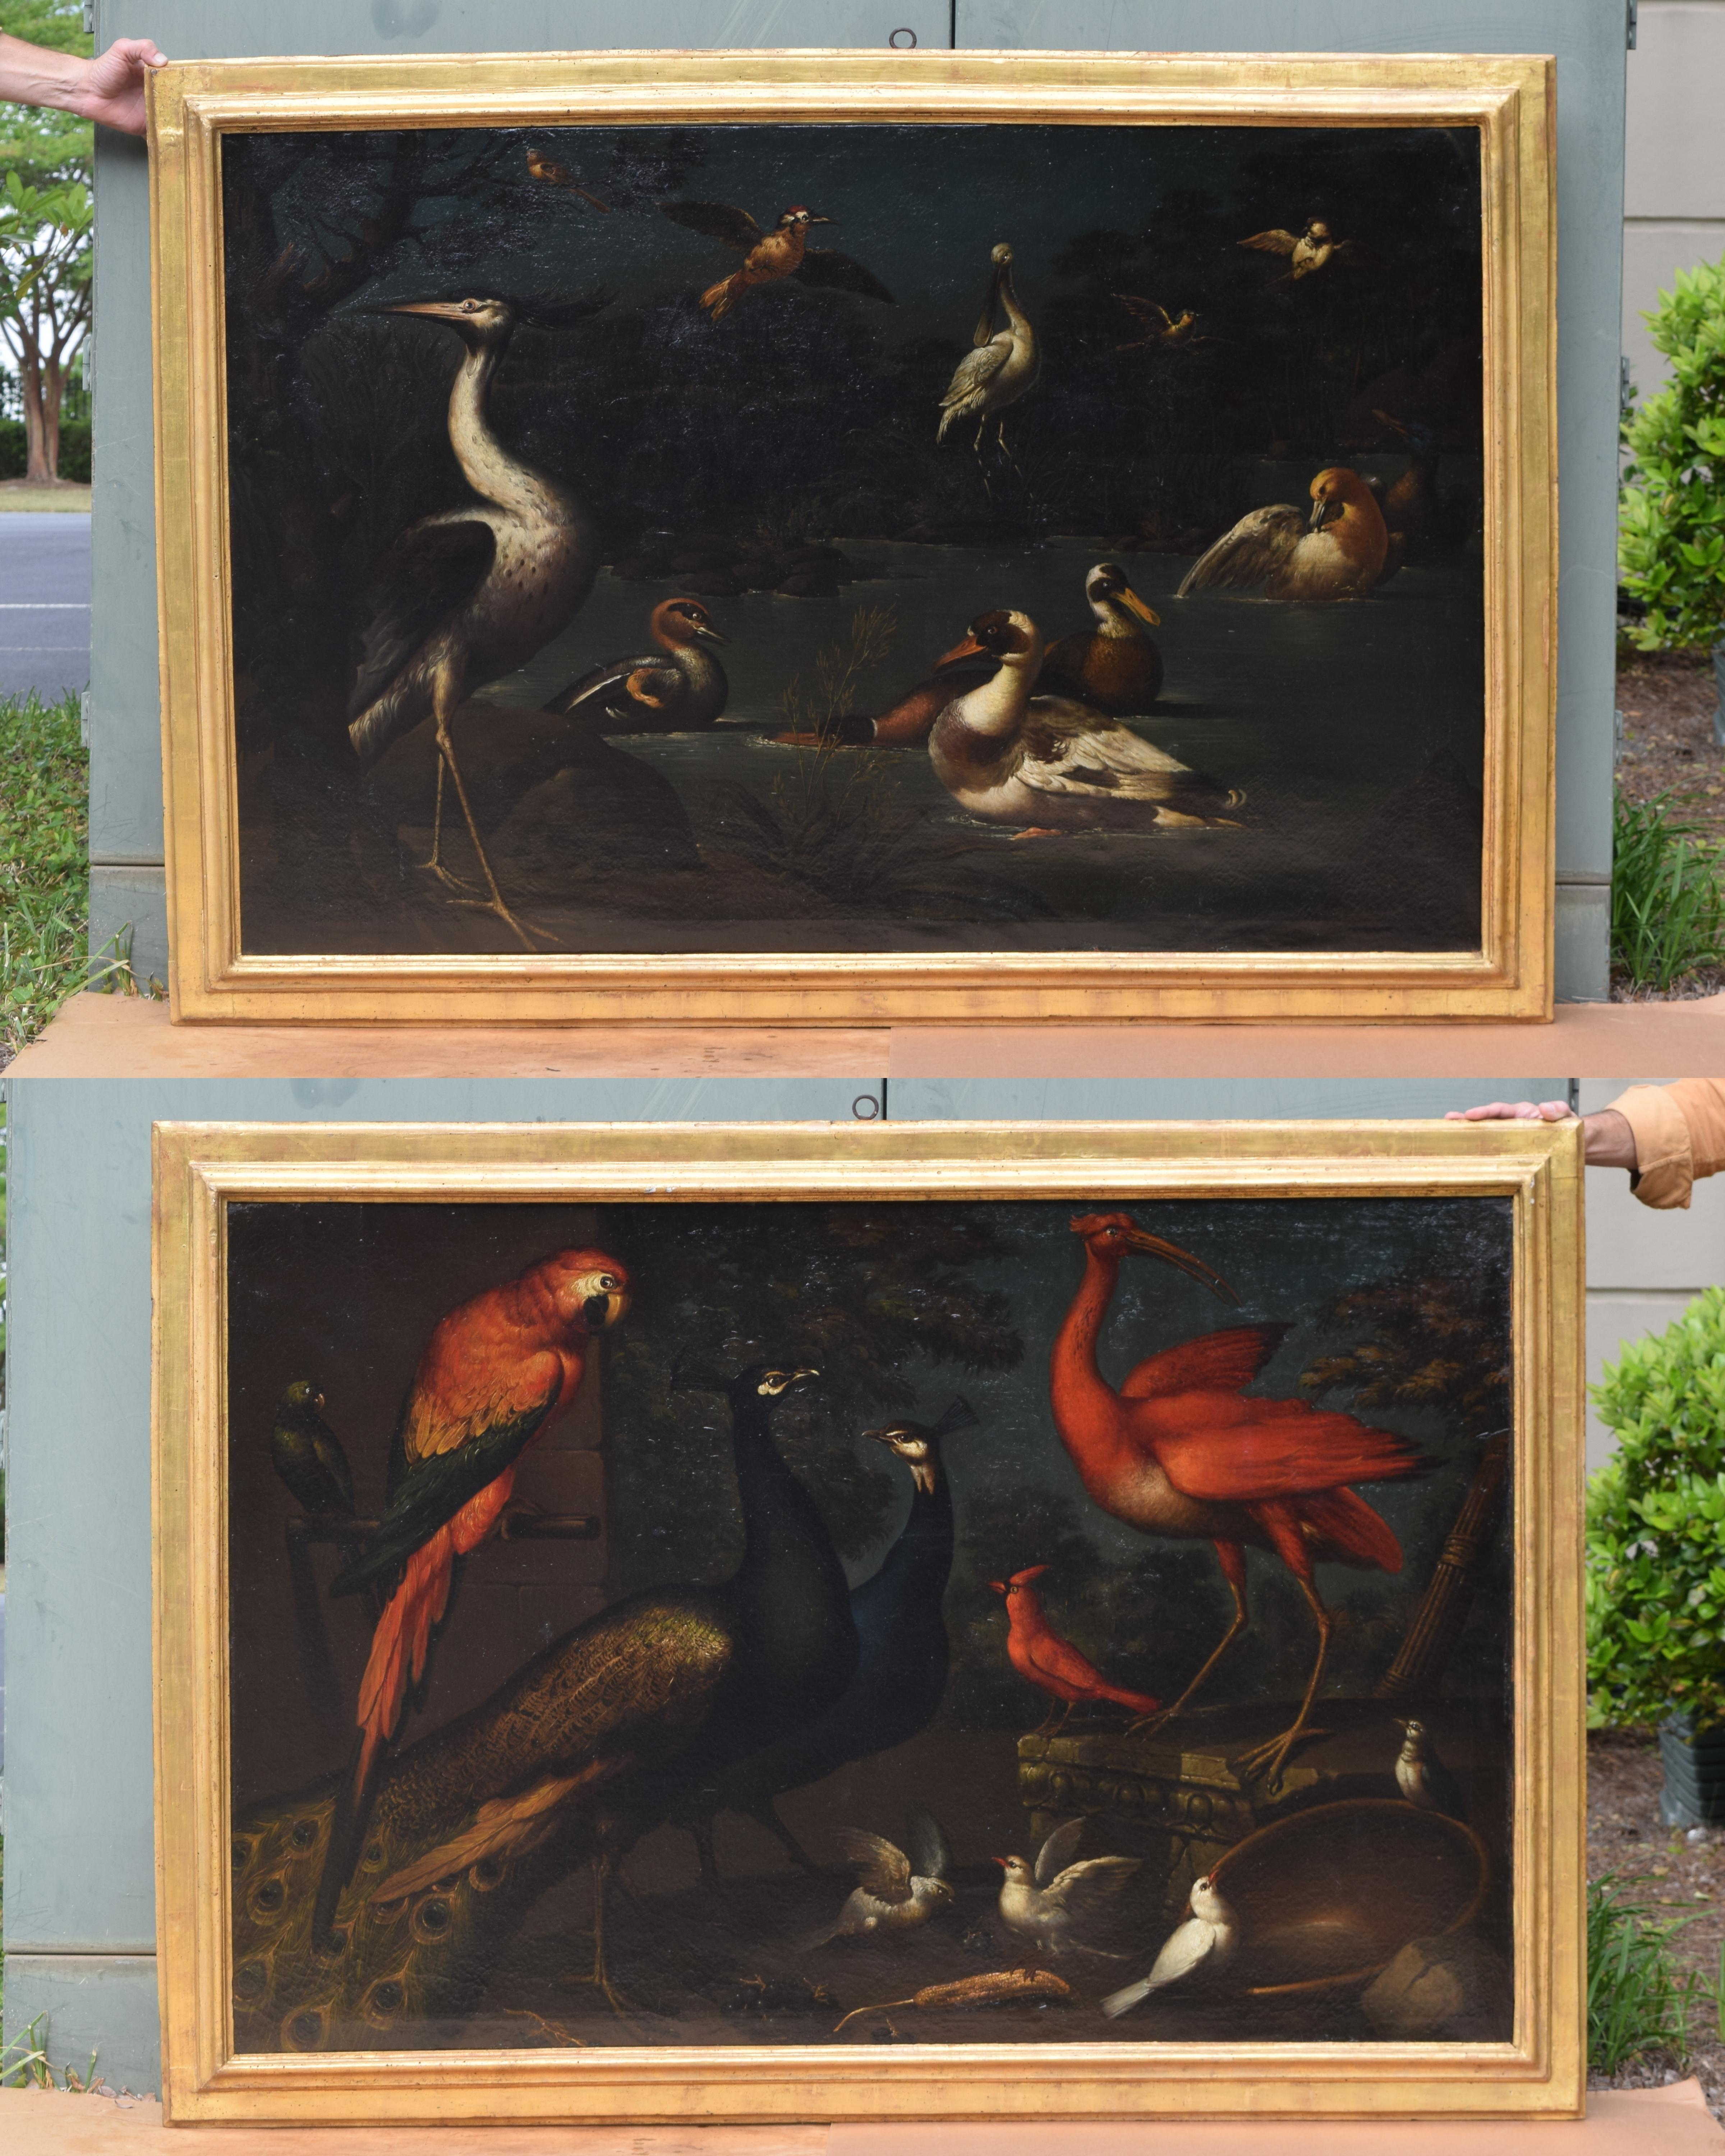 Paintings of exotic birds, fowl, and game animals were popular subjects for artists from the 17th century onward. Quite often the scenes were derived from collections of taxidermy to help create the correct anatomy and scale amongst them. This